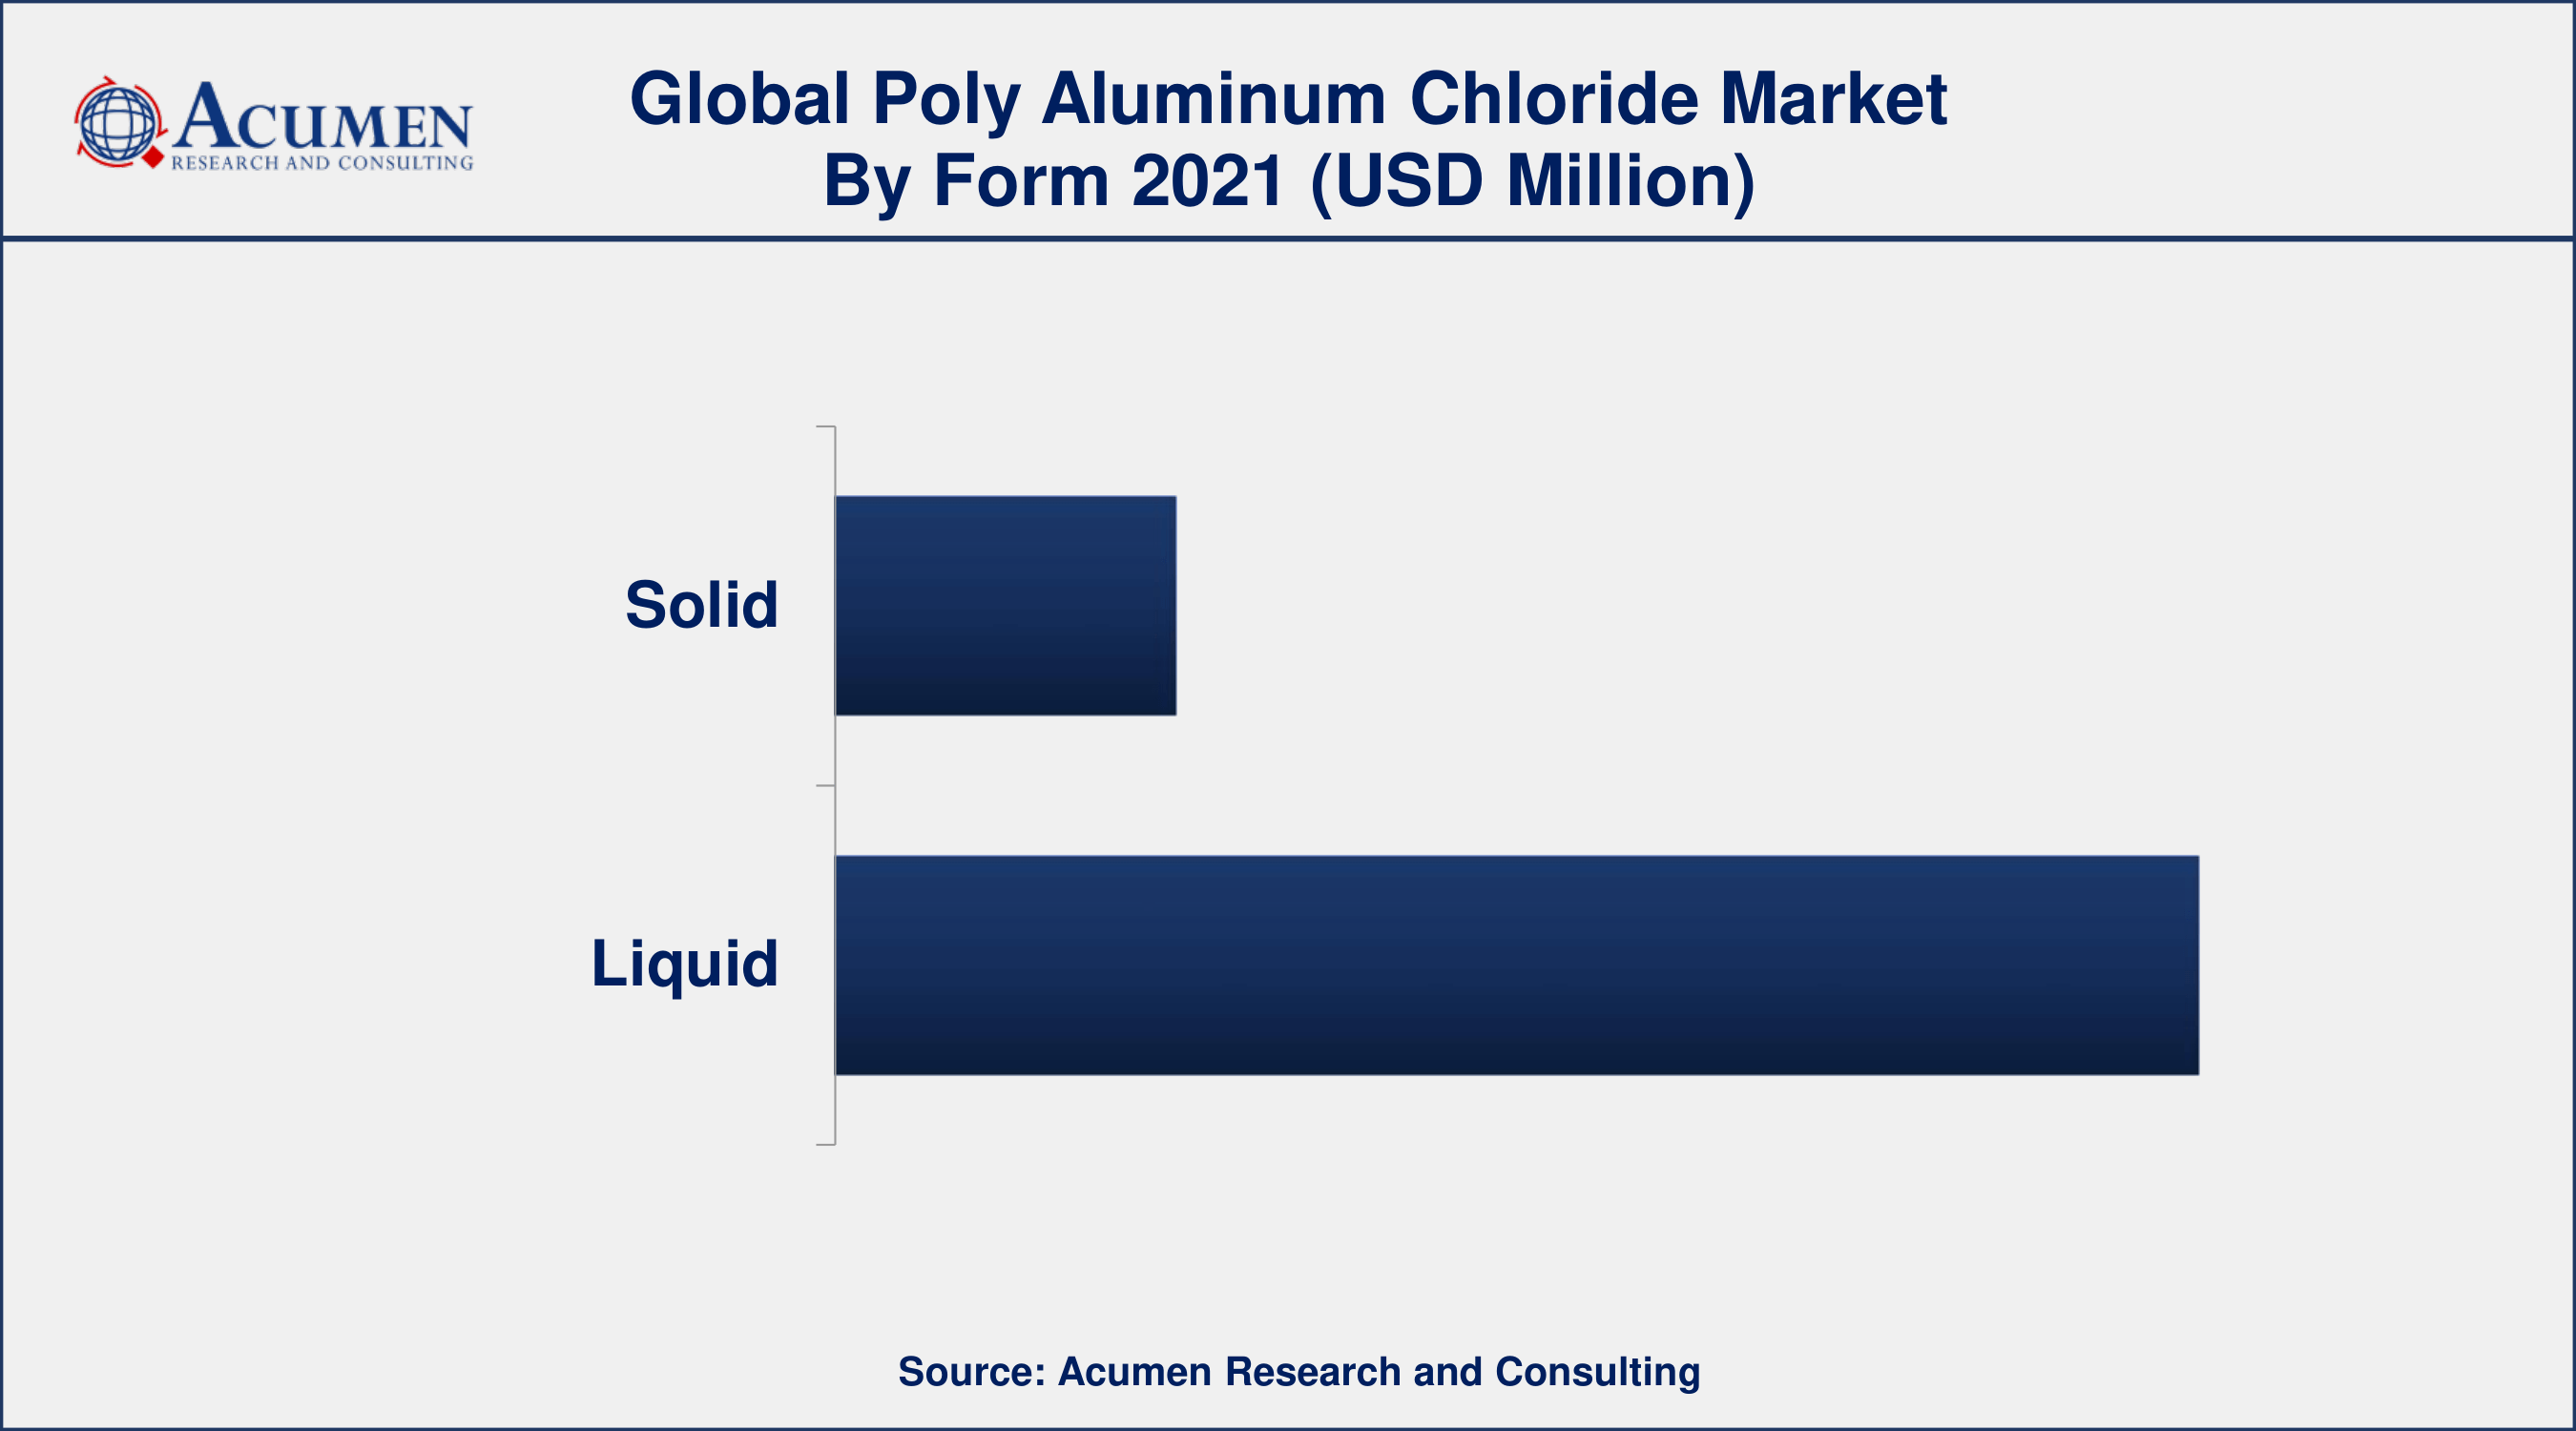 By form, the liquid segment has accounted market share of over 81% in 2021